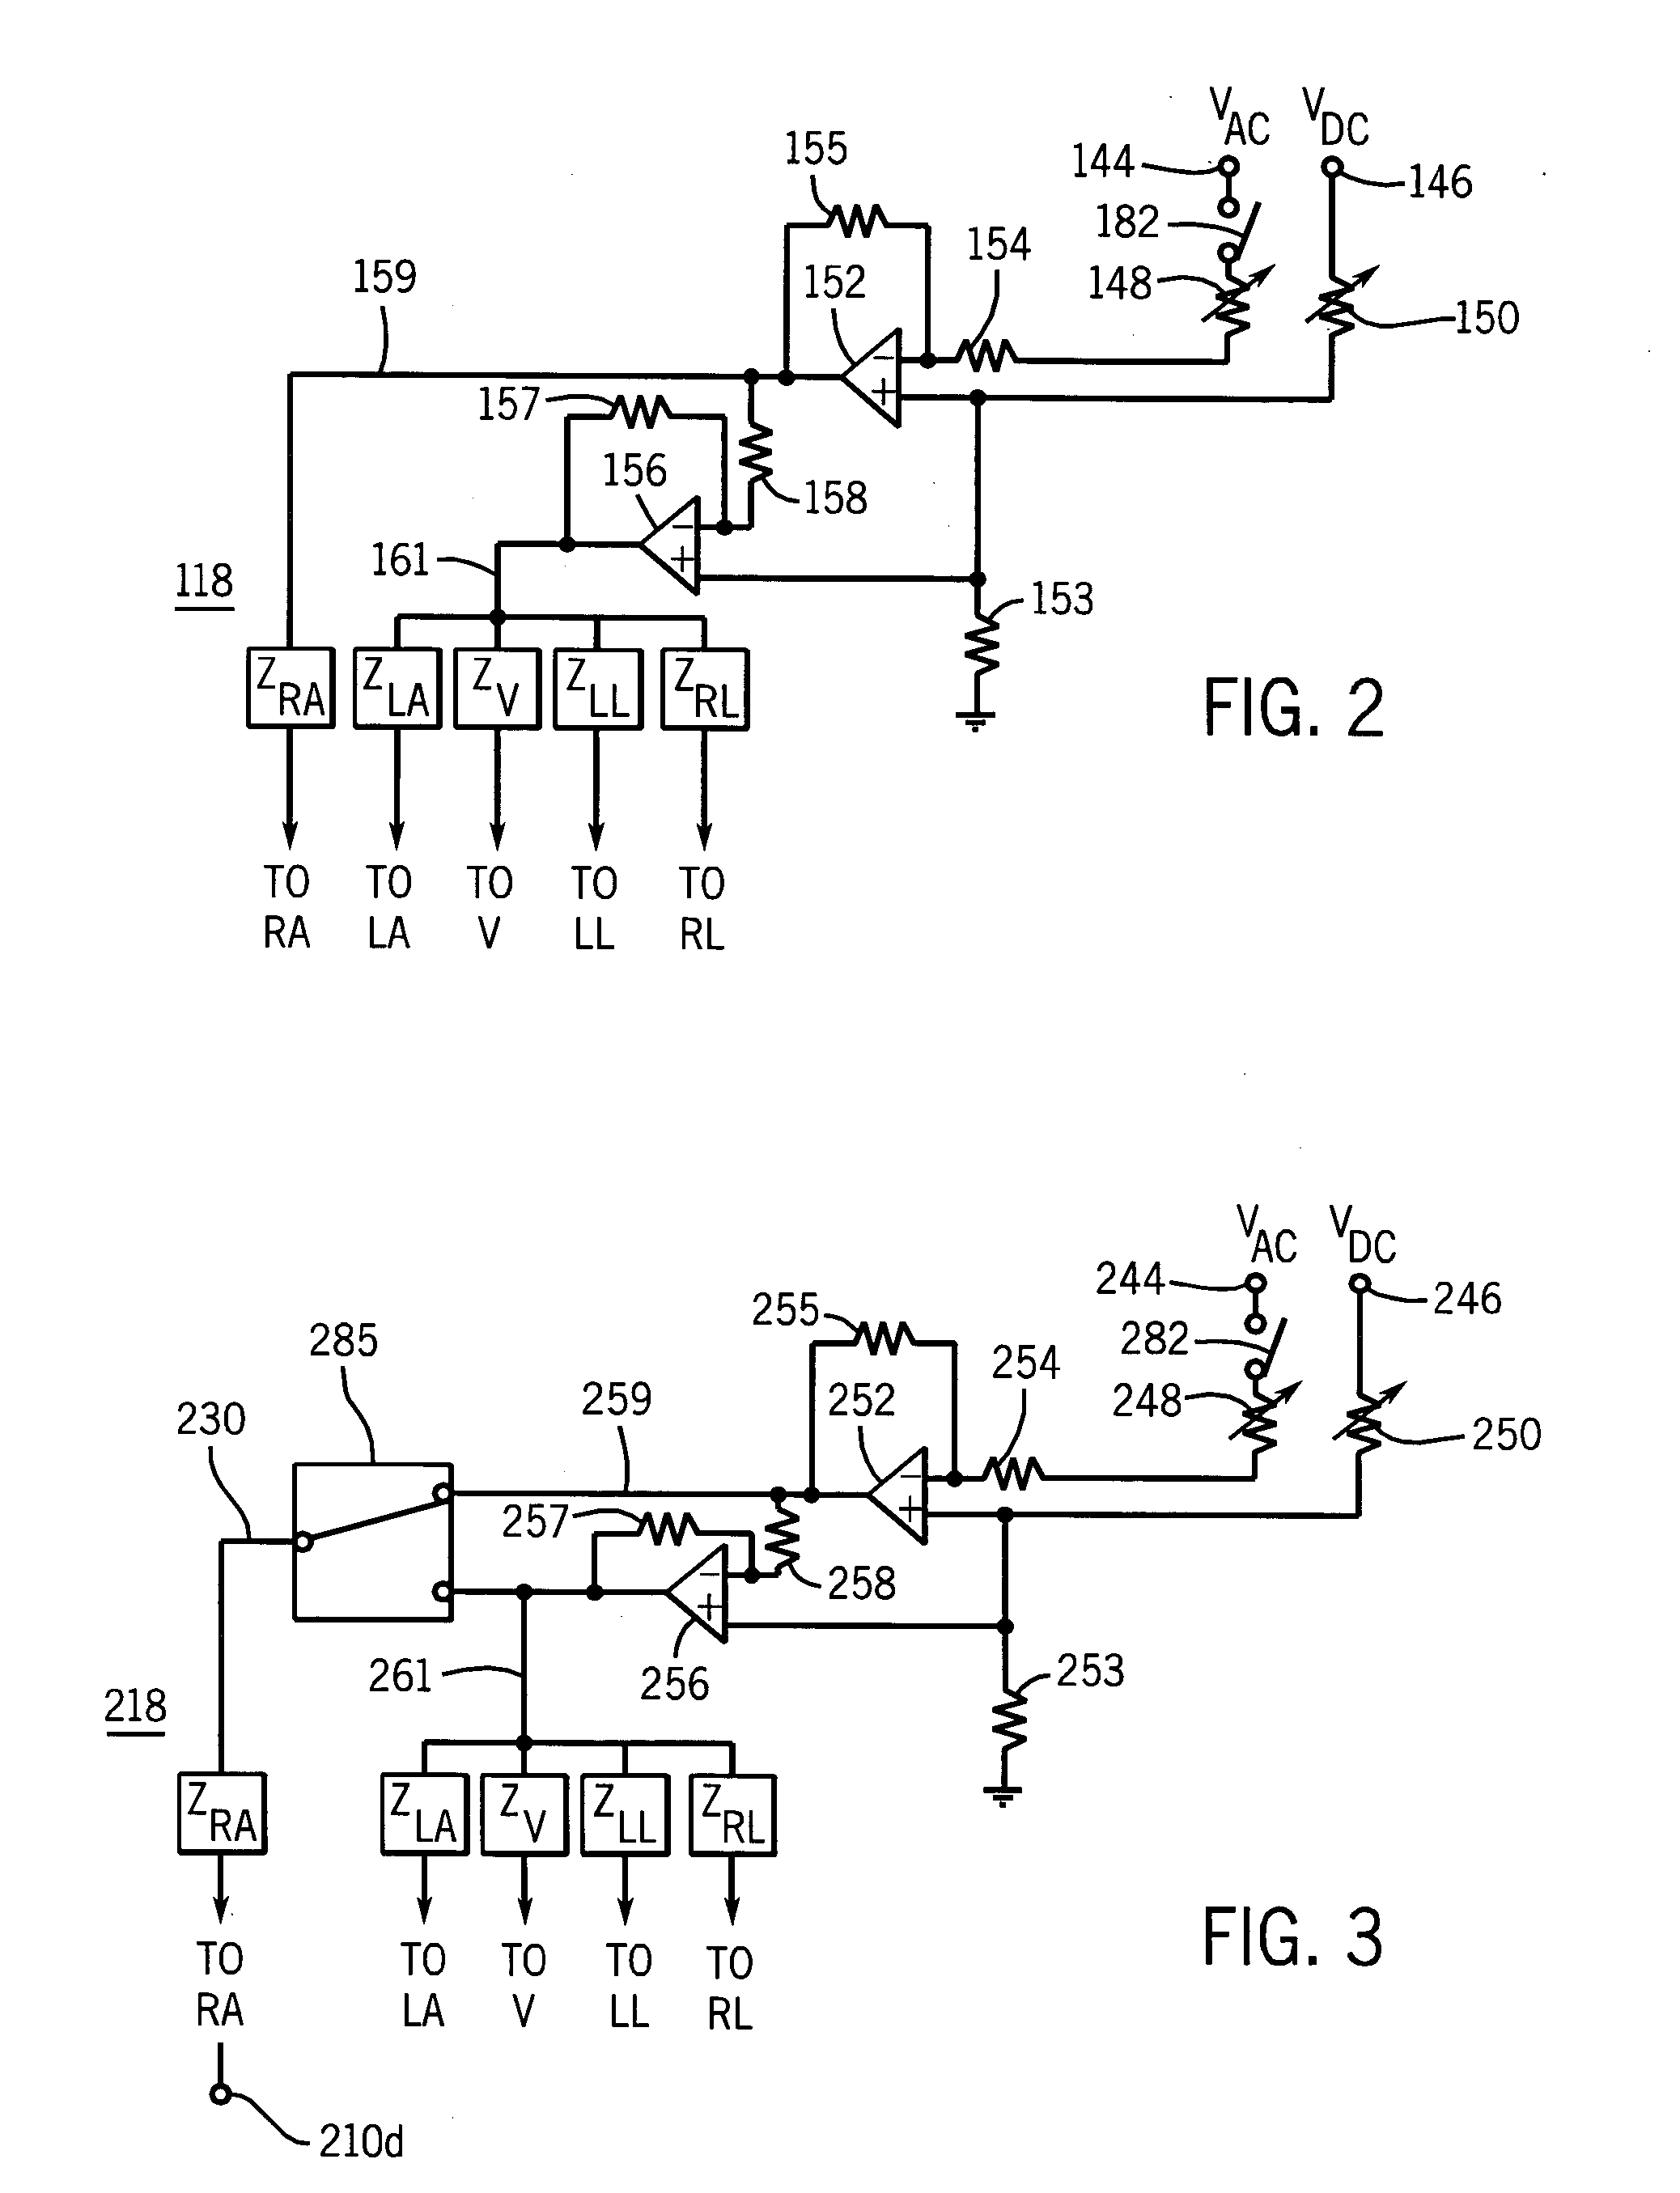 Impedance measurement apparatus for assessment of biomedical electrode interface quality